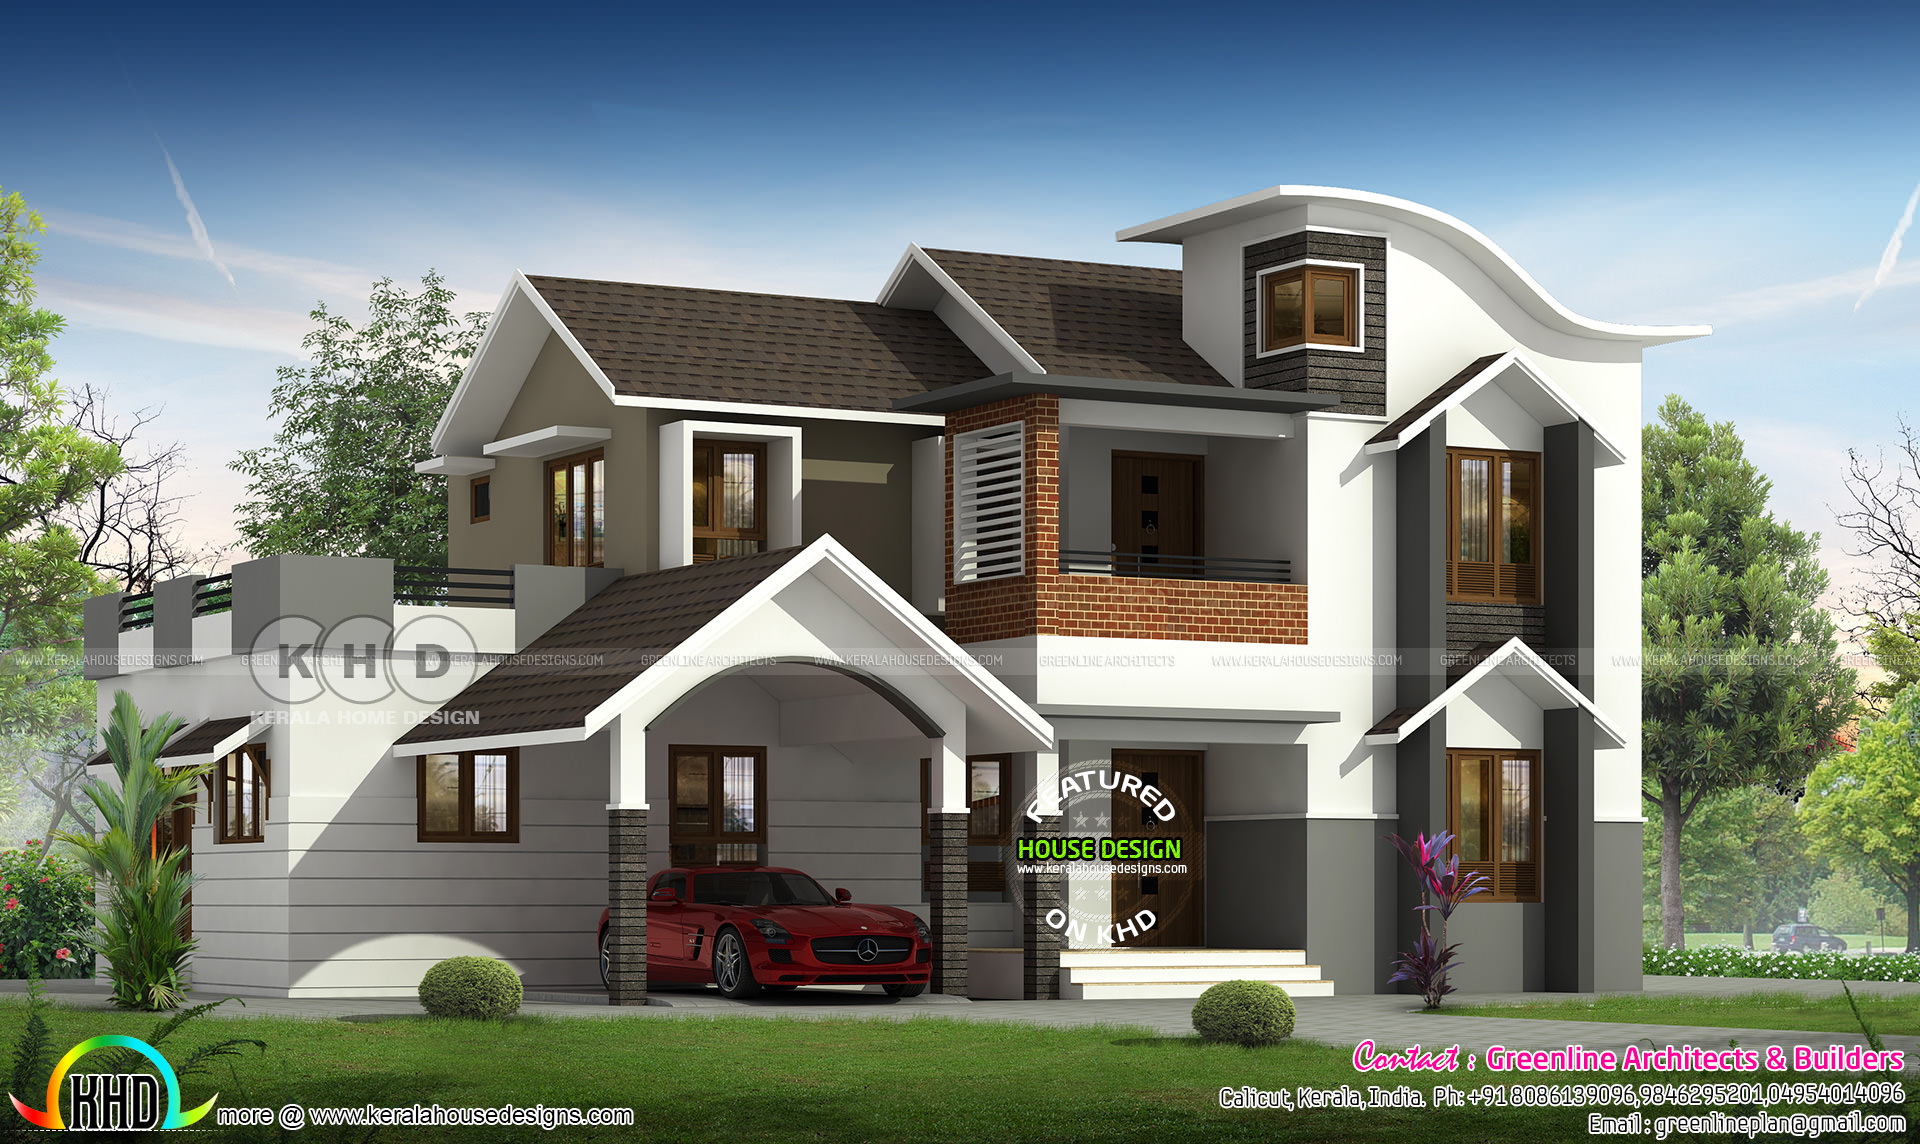 2019 Kerala  home  design  and floor plans  8000 houses 